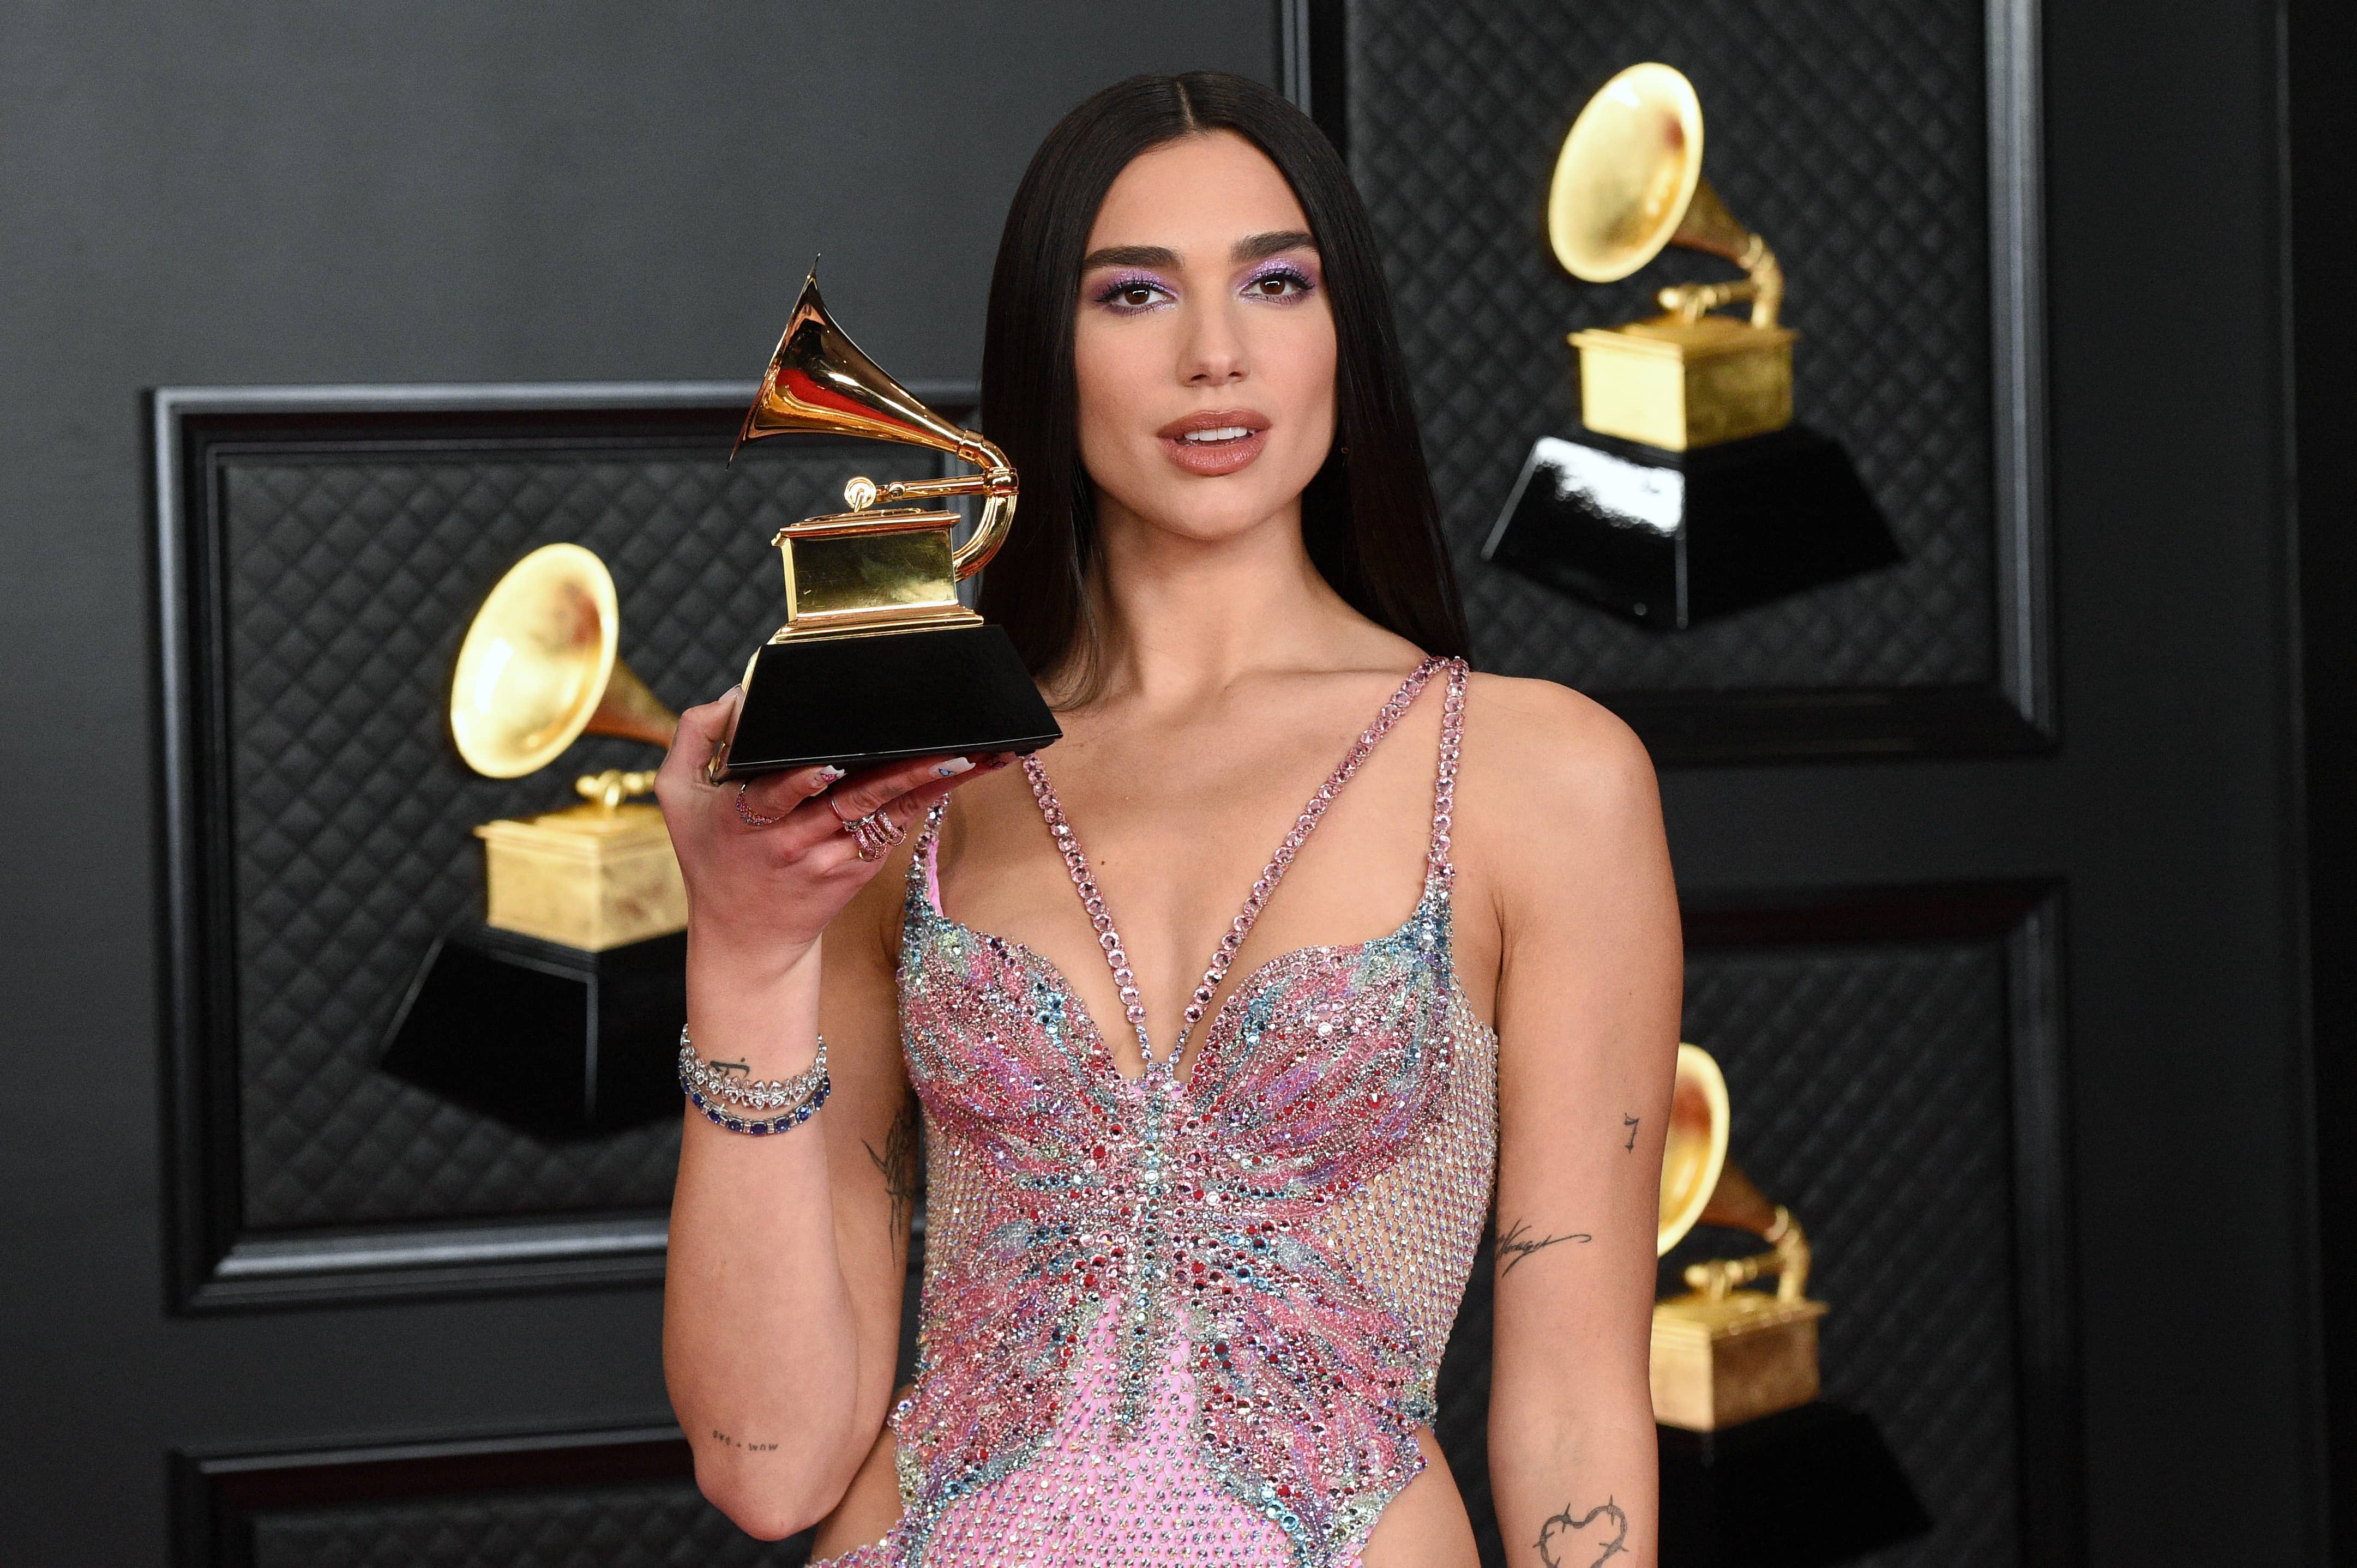 Dua Lipa - Levitating ft. DaBaby / Don't Start Now (Live at the GRAMMYs  2021) 